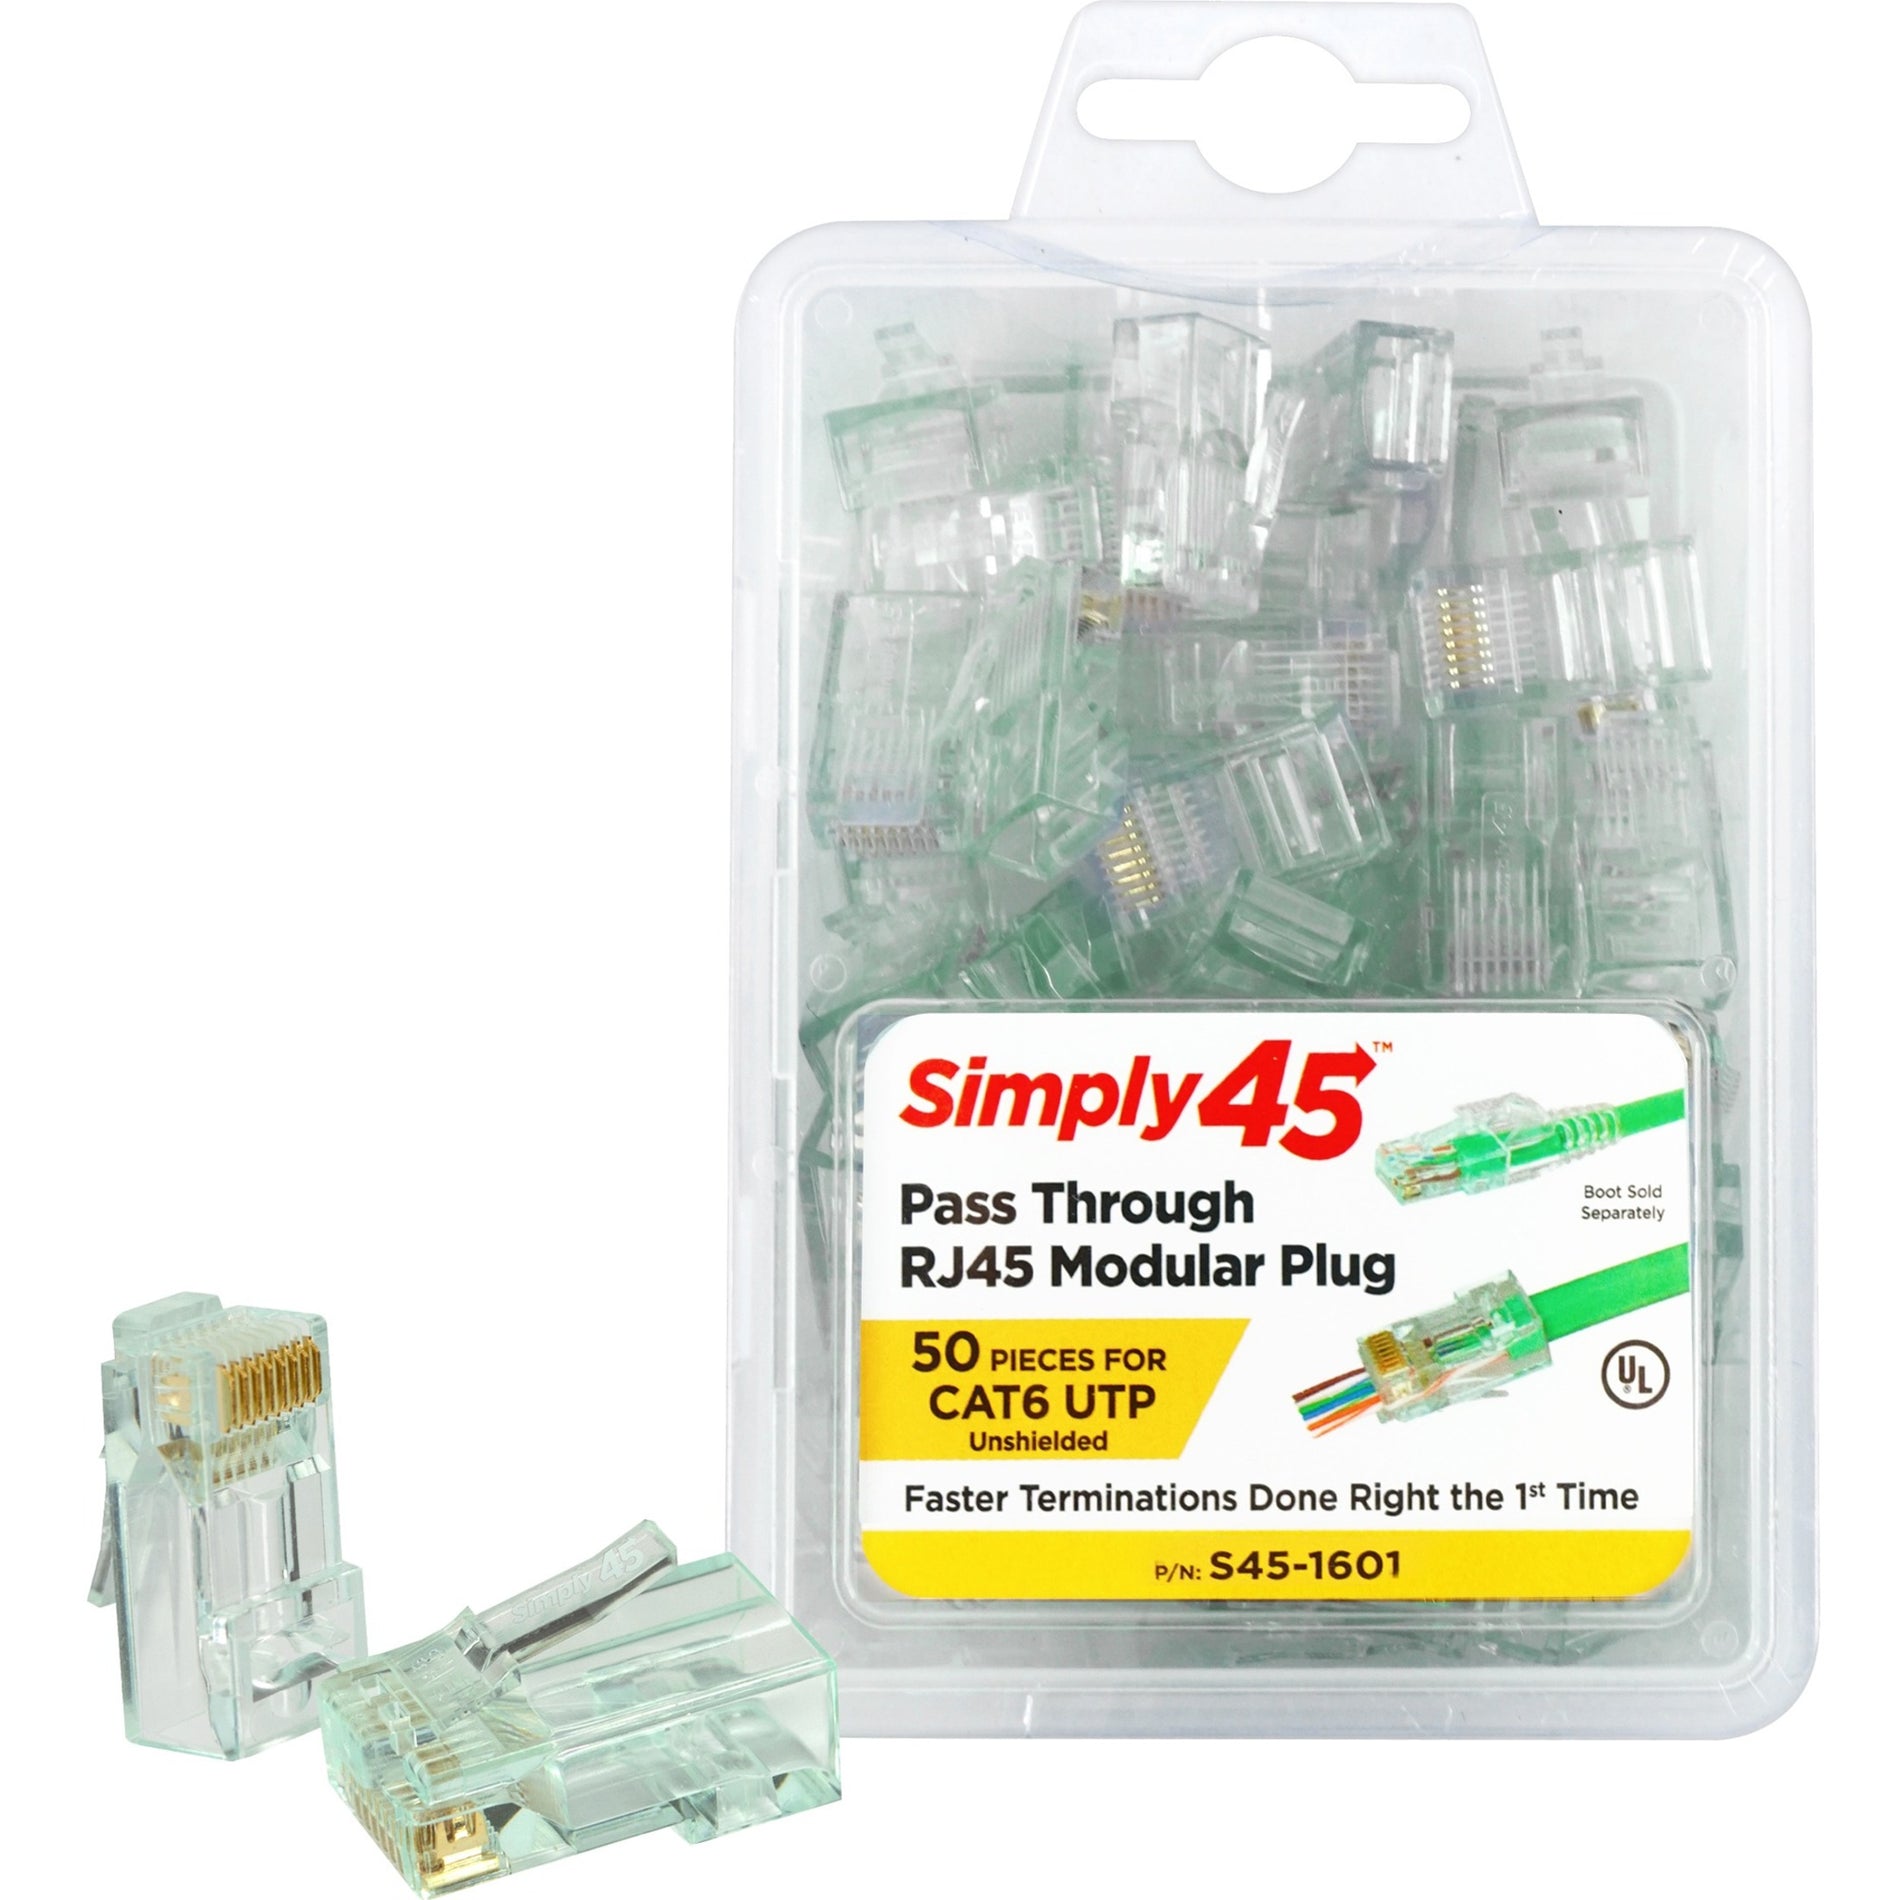 SIMPLY45 S45-1601 1601 - Cat6 Unshielded - Pass Through TJ45 - 50pc Clamshell, Stranded, Crosstalk Protection, PoE, Fire Resistant, Green Tint